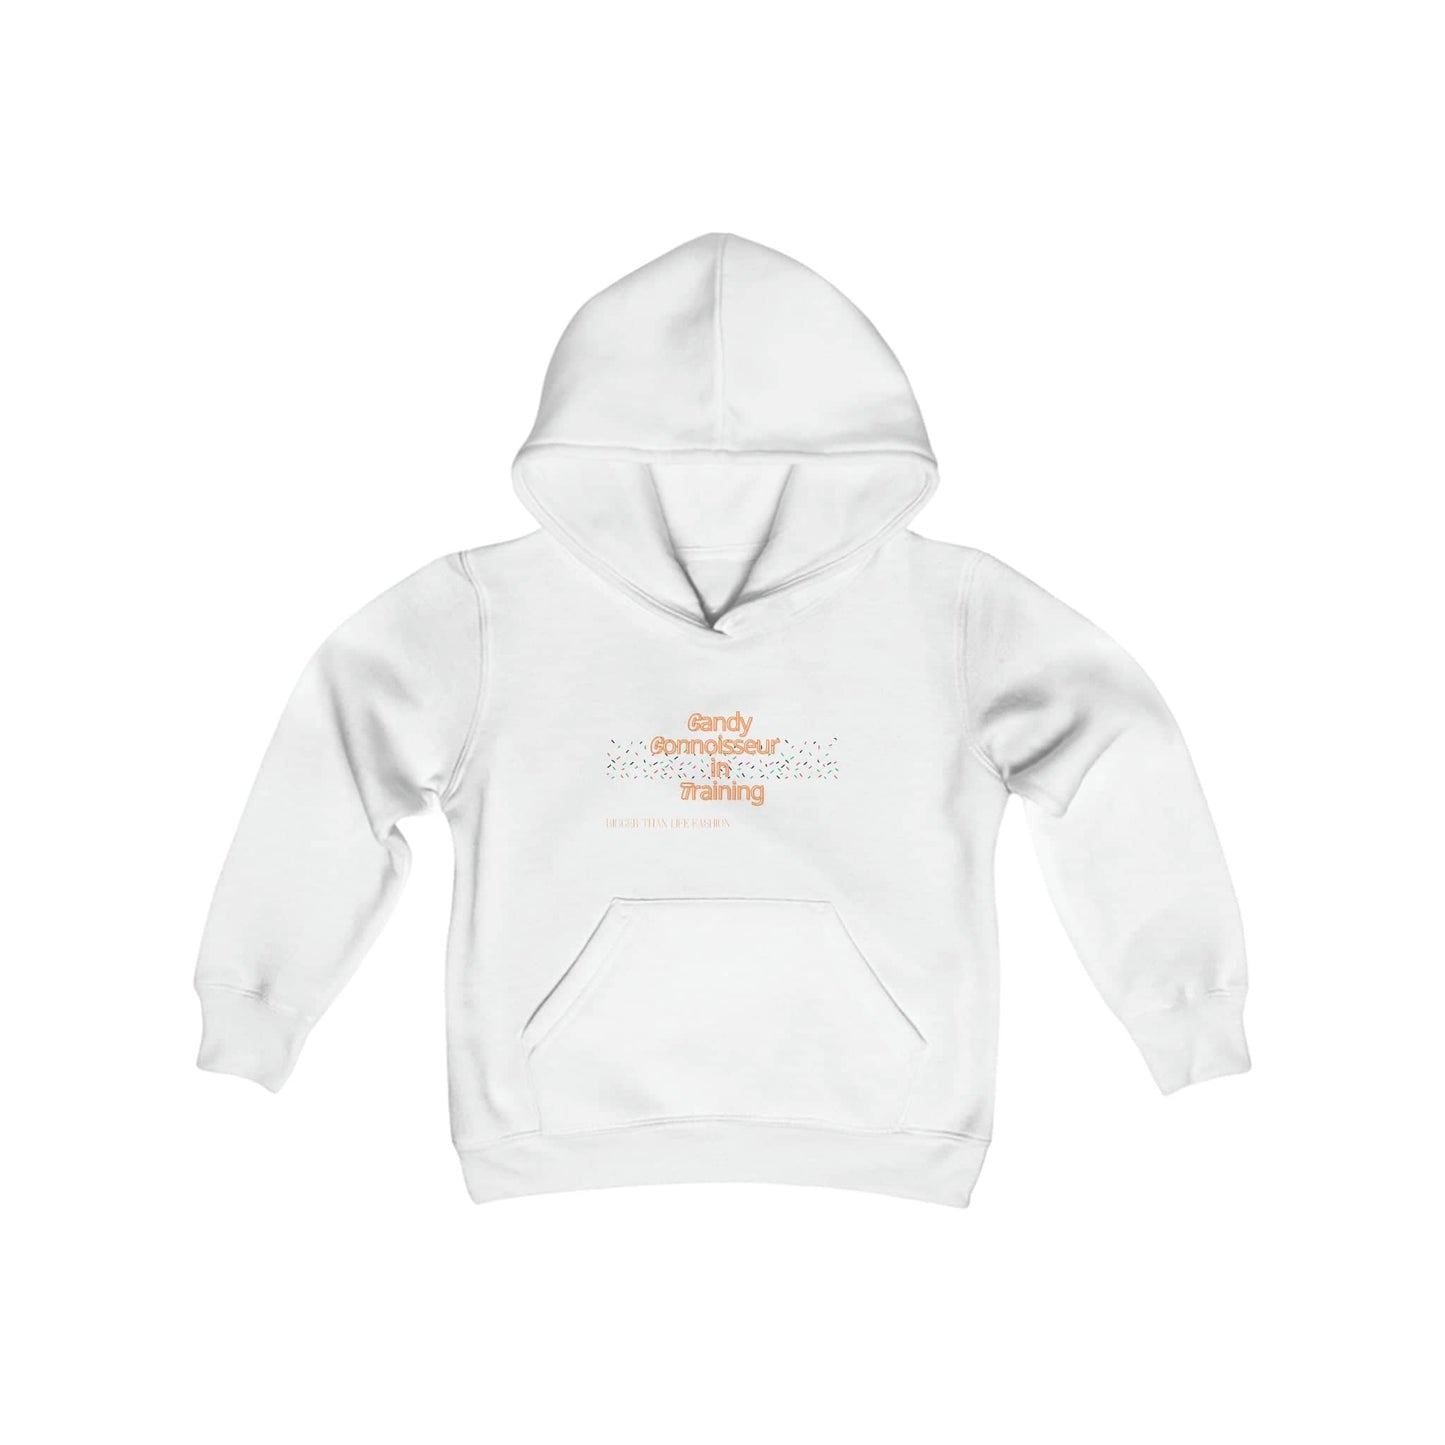 🎃 Candy Connoisseur: The Cozy Halloween Hoodie for Young Candy Lovers! Kids clothes Bigger Than Life   